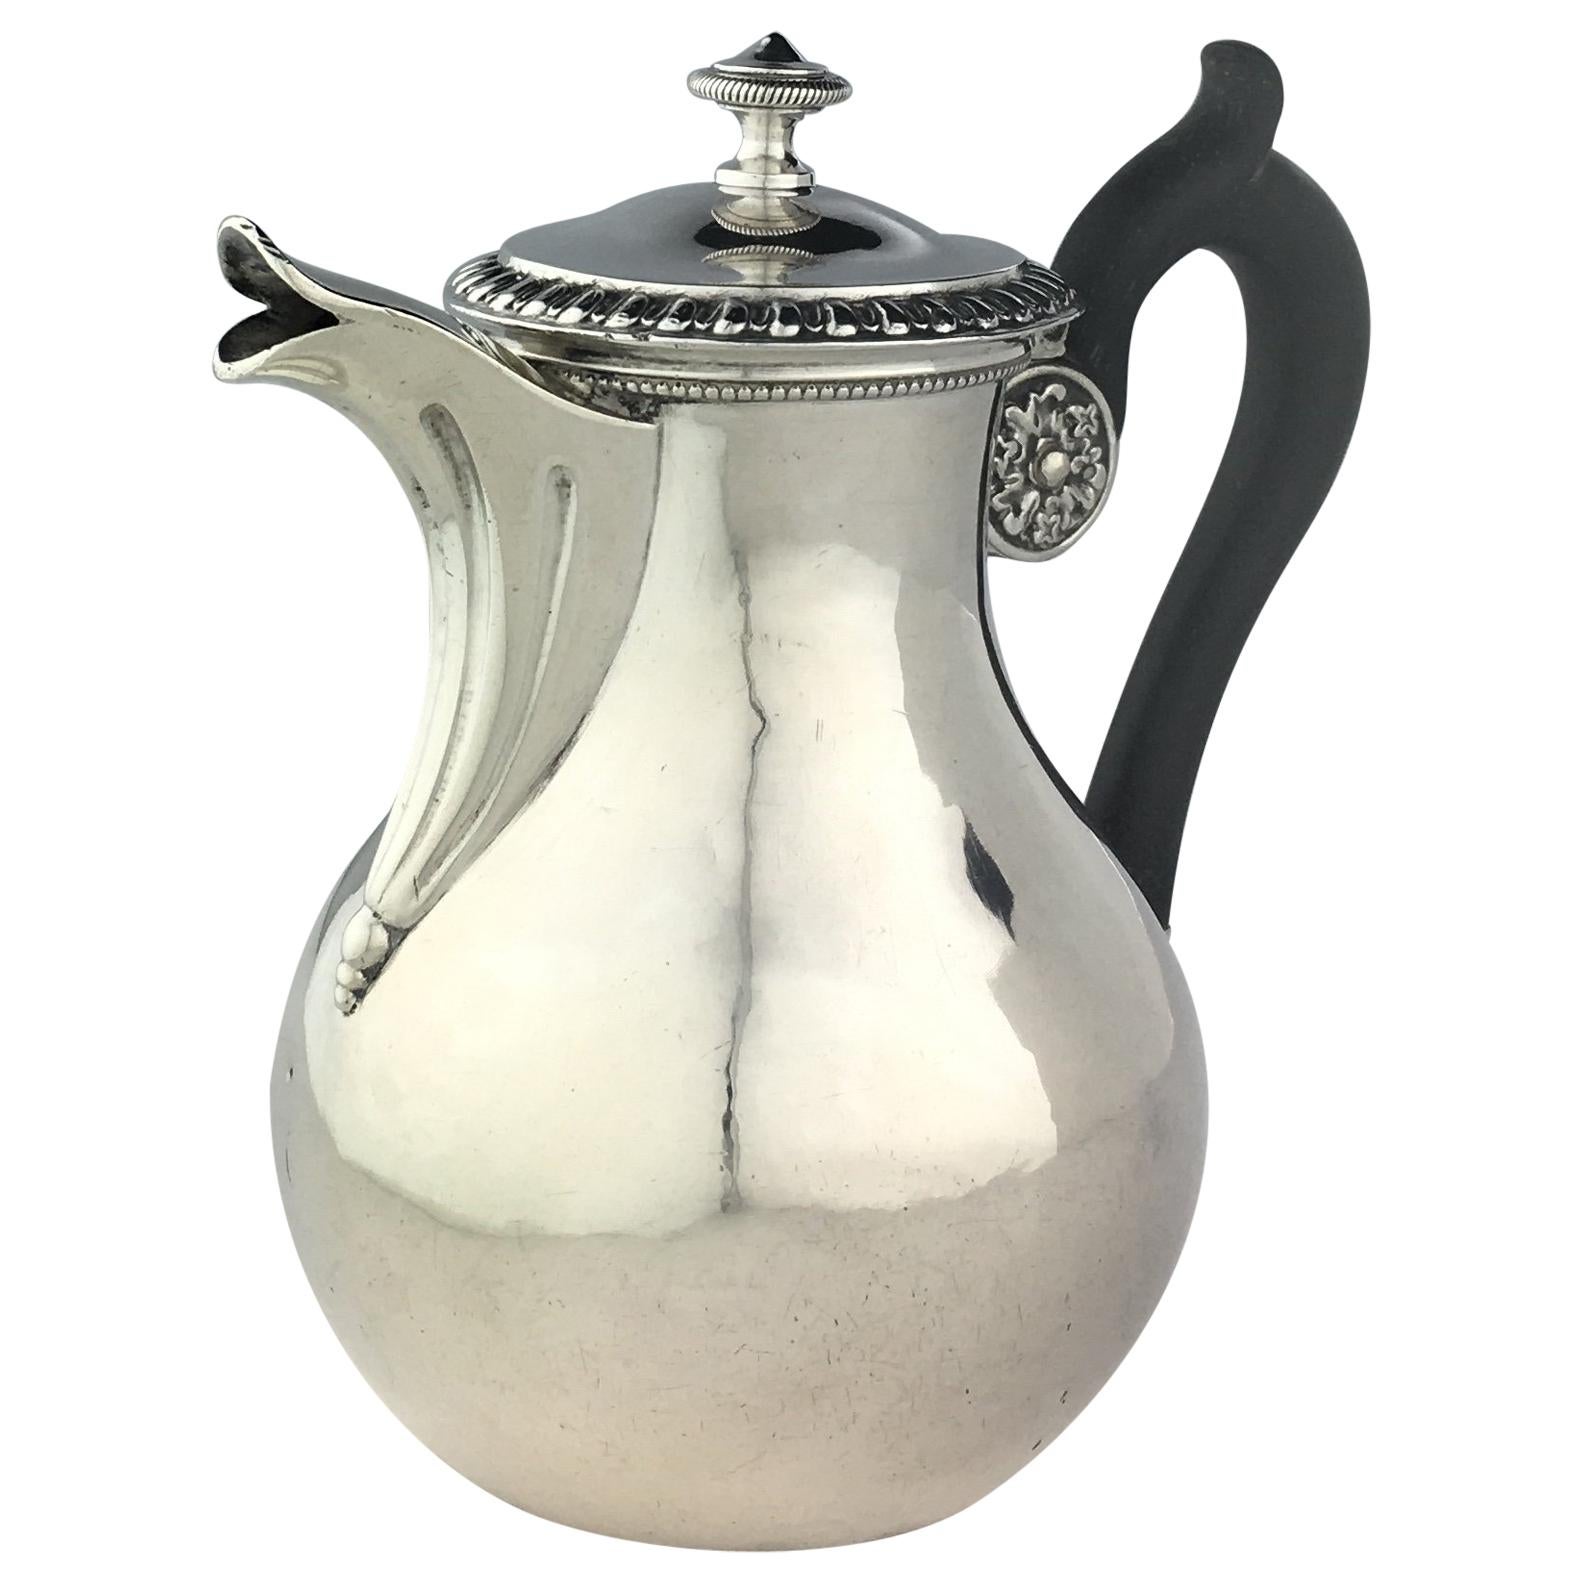 Maitre Fauvre 19th Century French Sterling Silver Chocolate, Tea or Coffee Pot